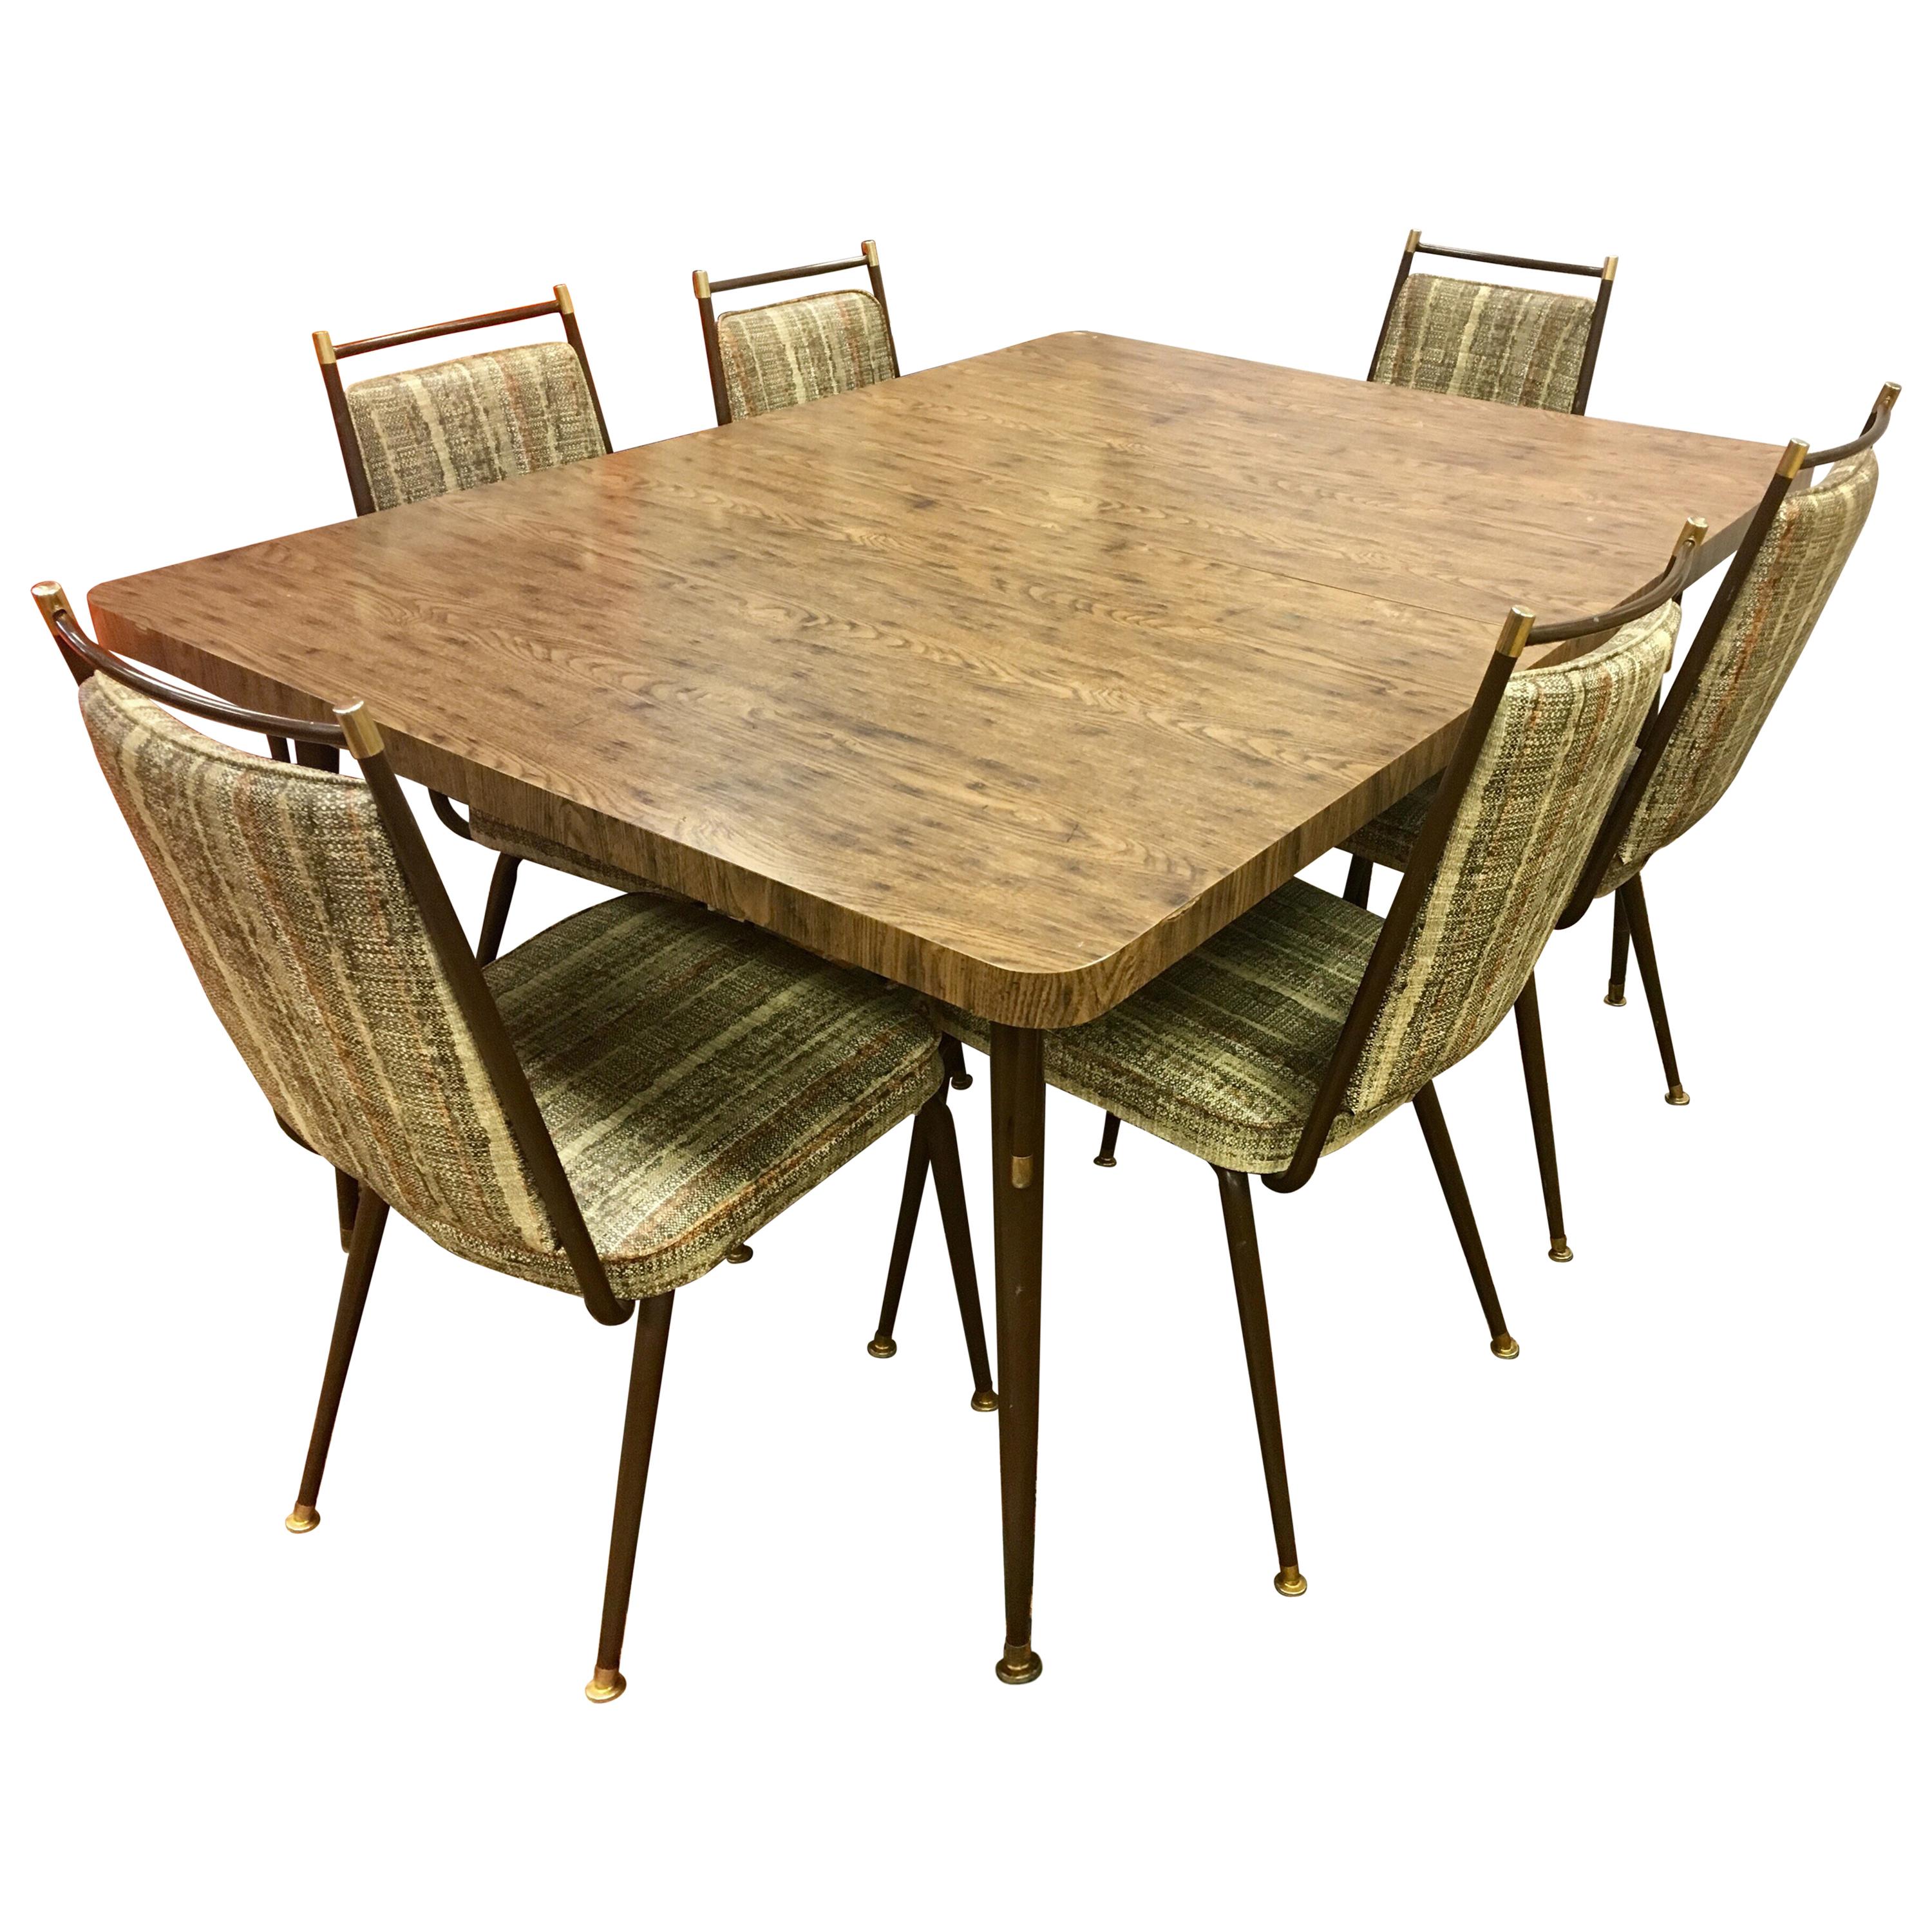 Daystrom Mid-Century Modern Kitchen Dining Set Table Chairs